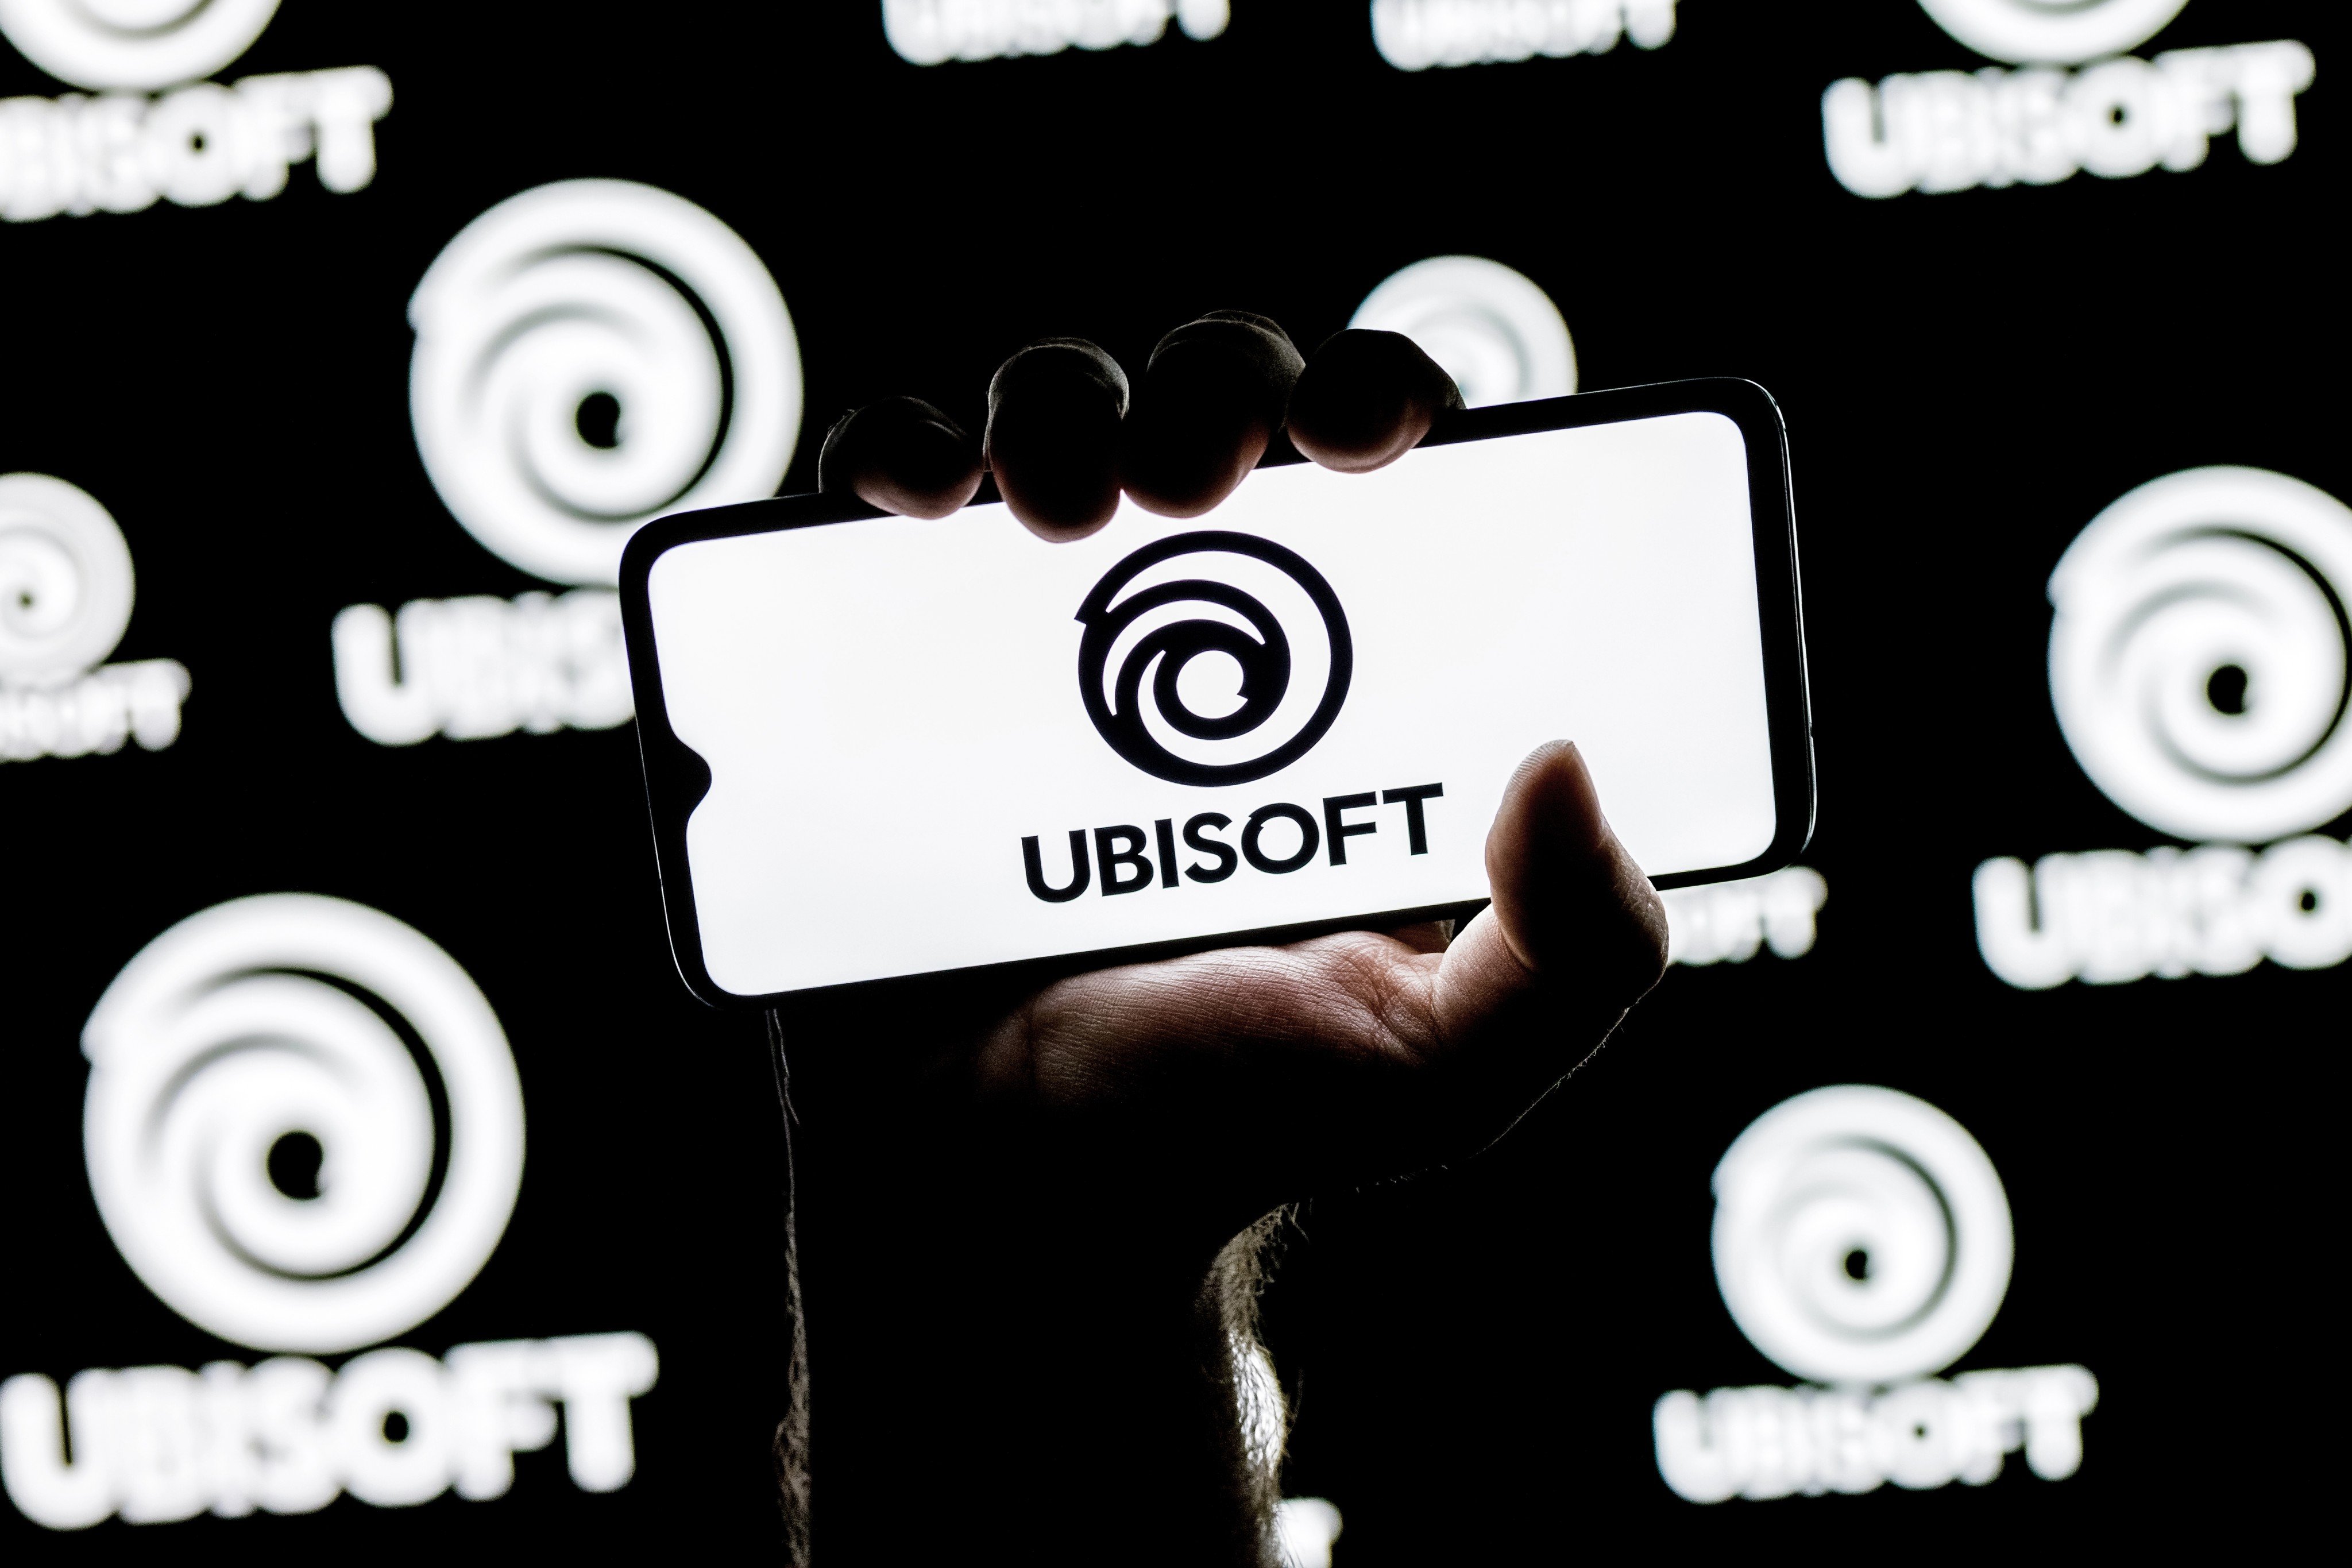 French video gaming giant Ubisoft Entertainment has decided to discontinue its direct merchandise sales business in China. Photo: Shutterstock